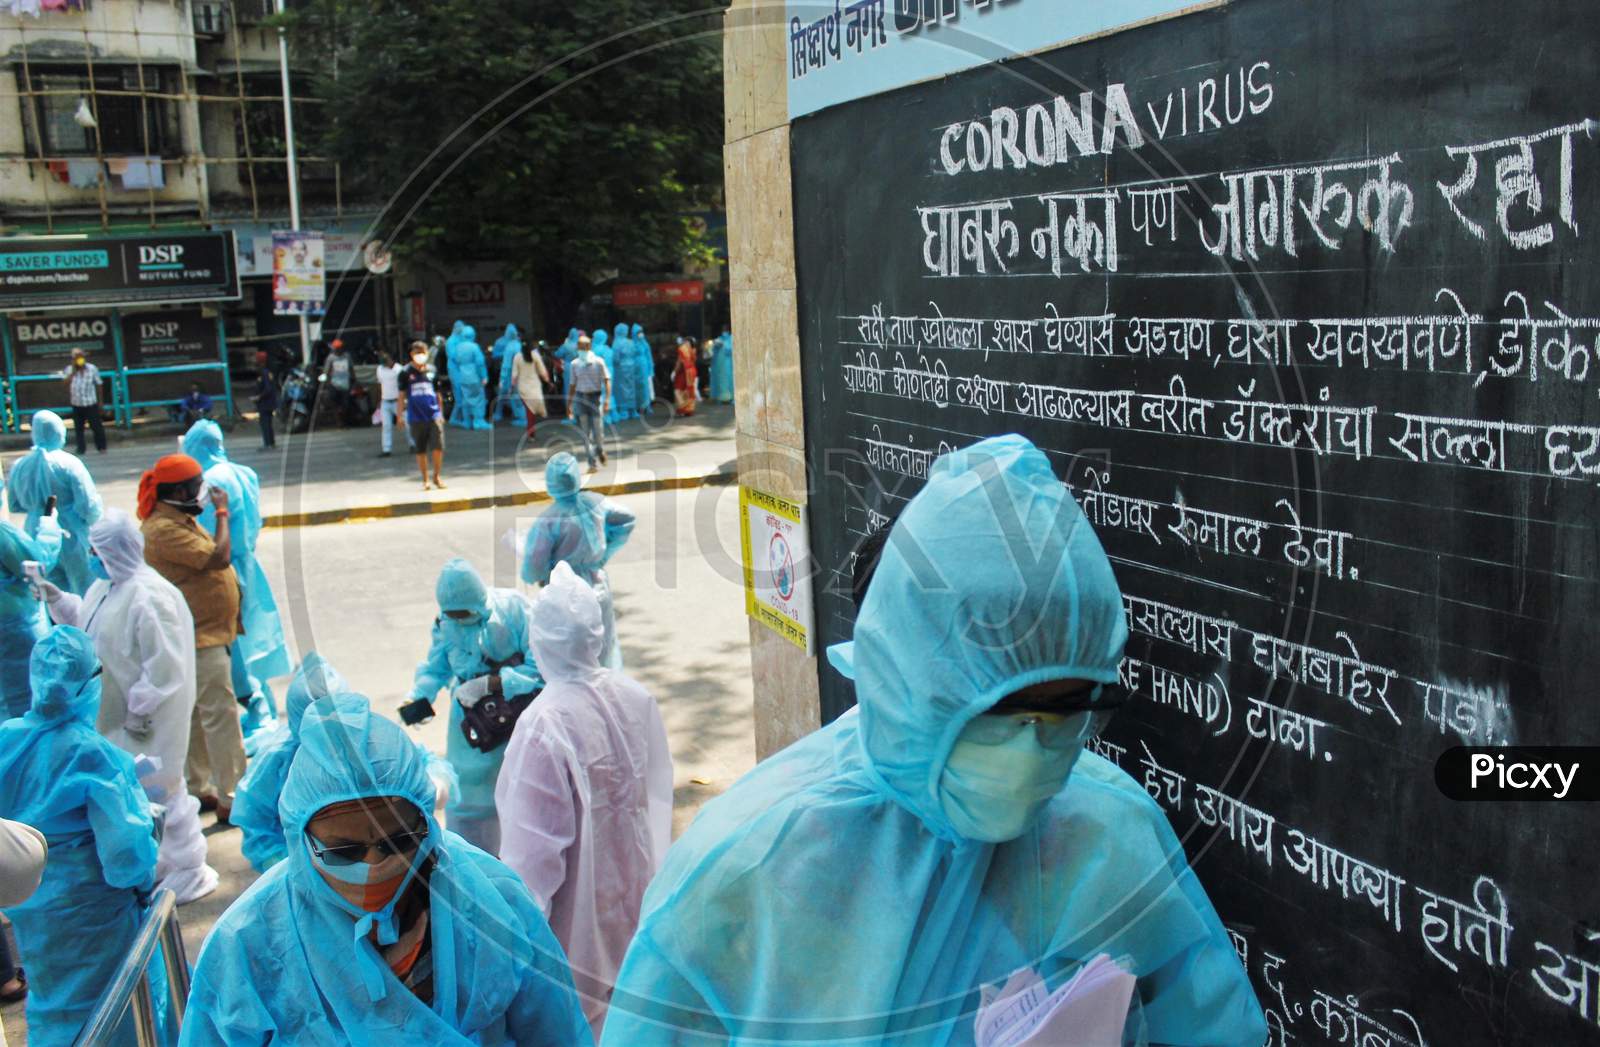 Healthcare workers on their daily rounds to slum areas to check the residents during a nationwide lockdown to slow the spreading of the coronavirus disease (COVID-19), in Mumbai, India on April 20, 2020.